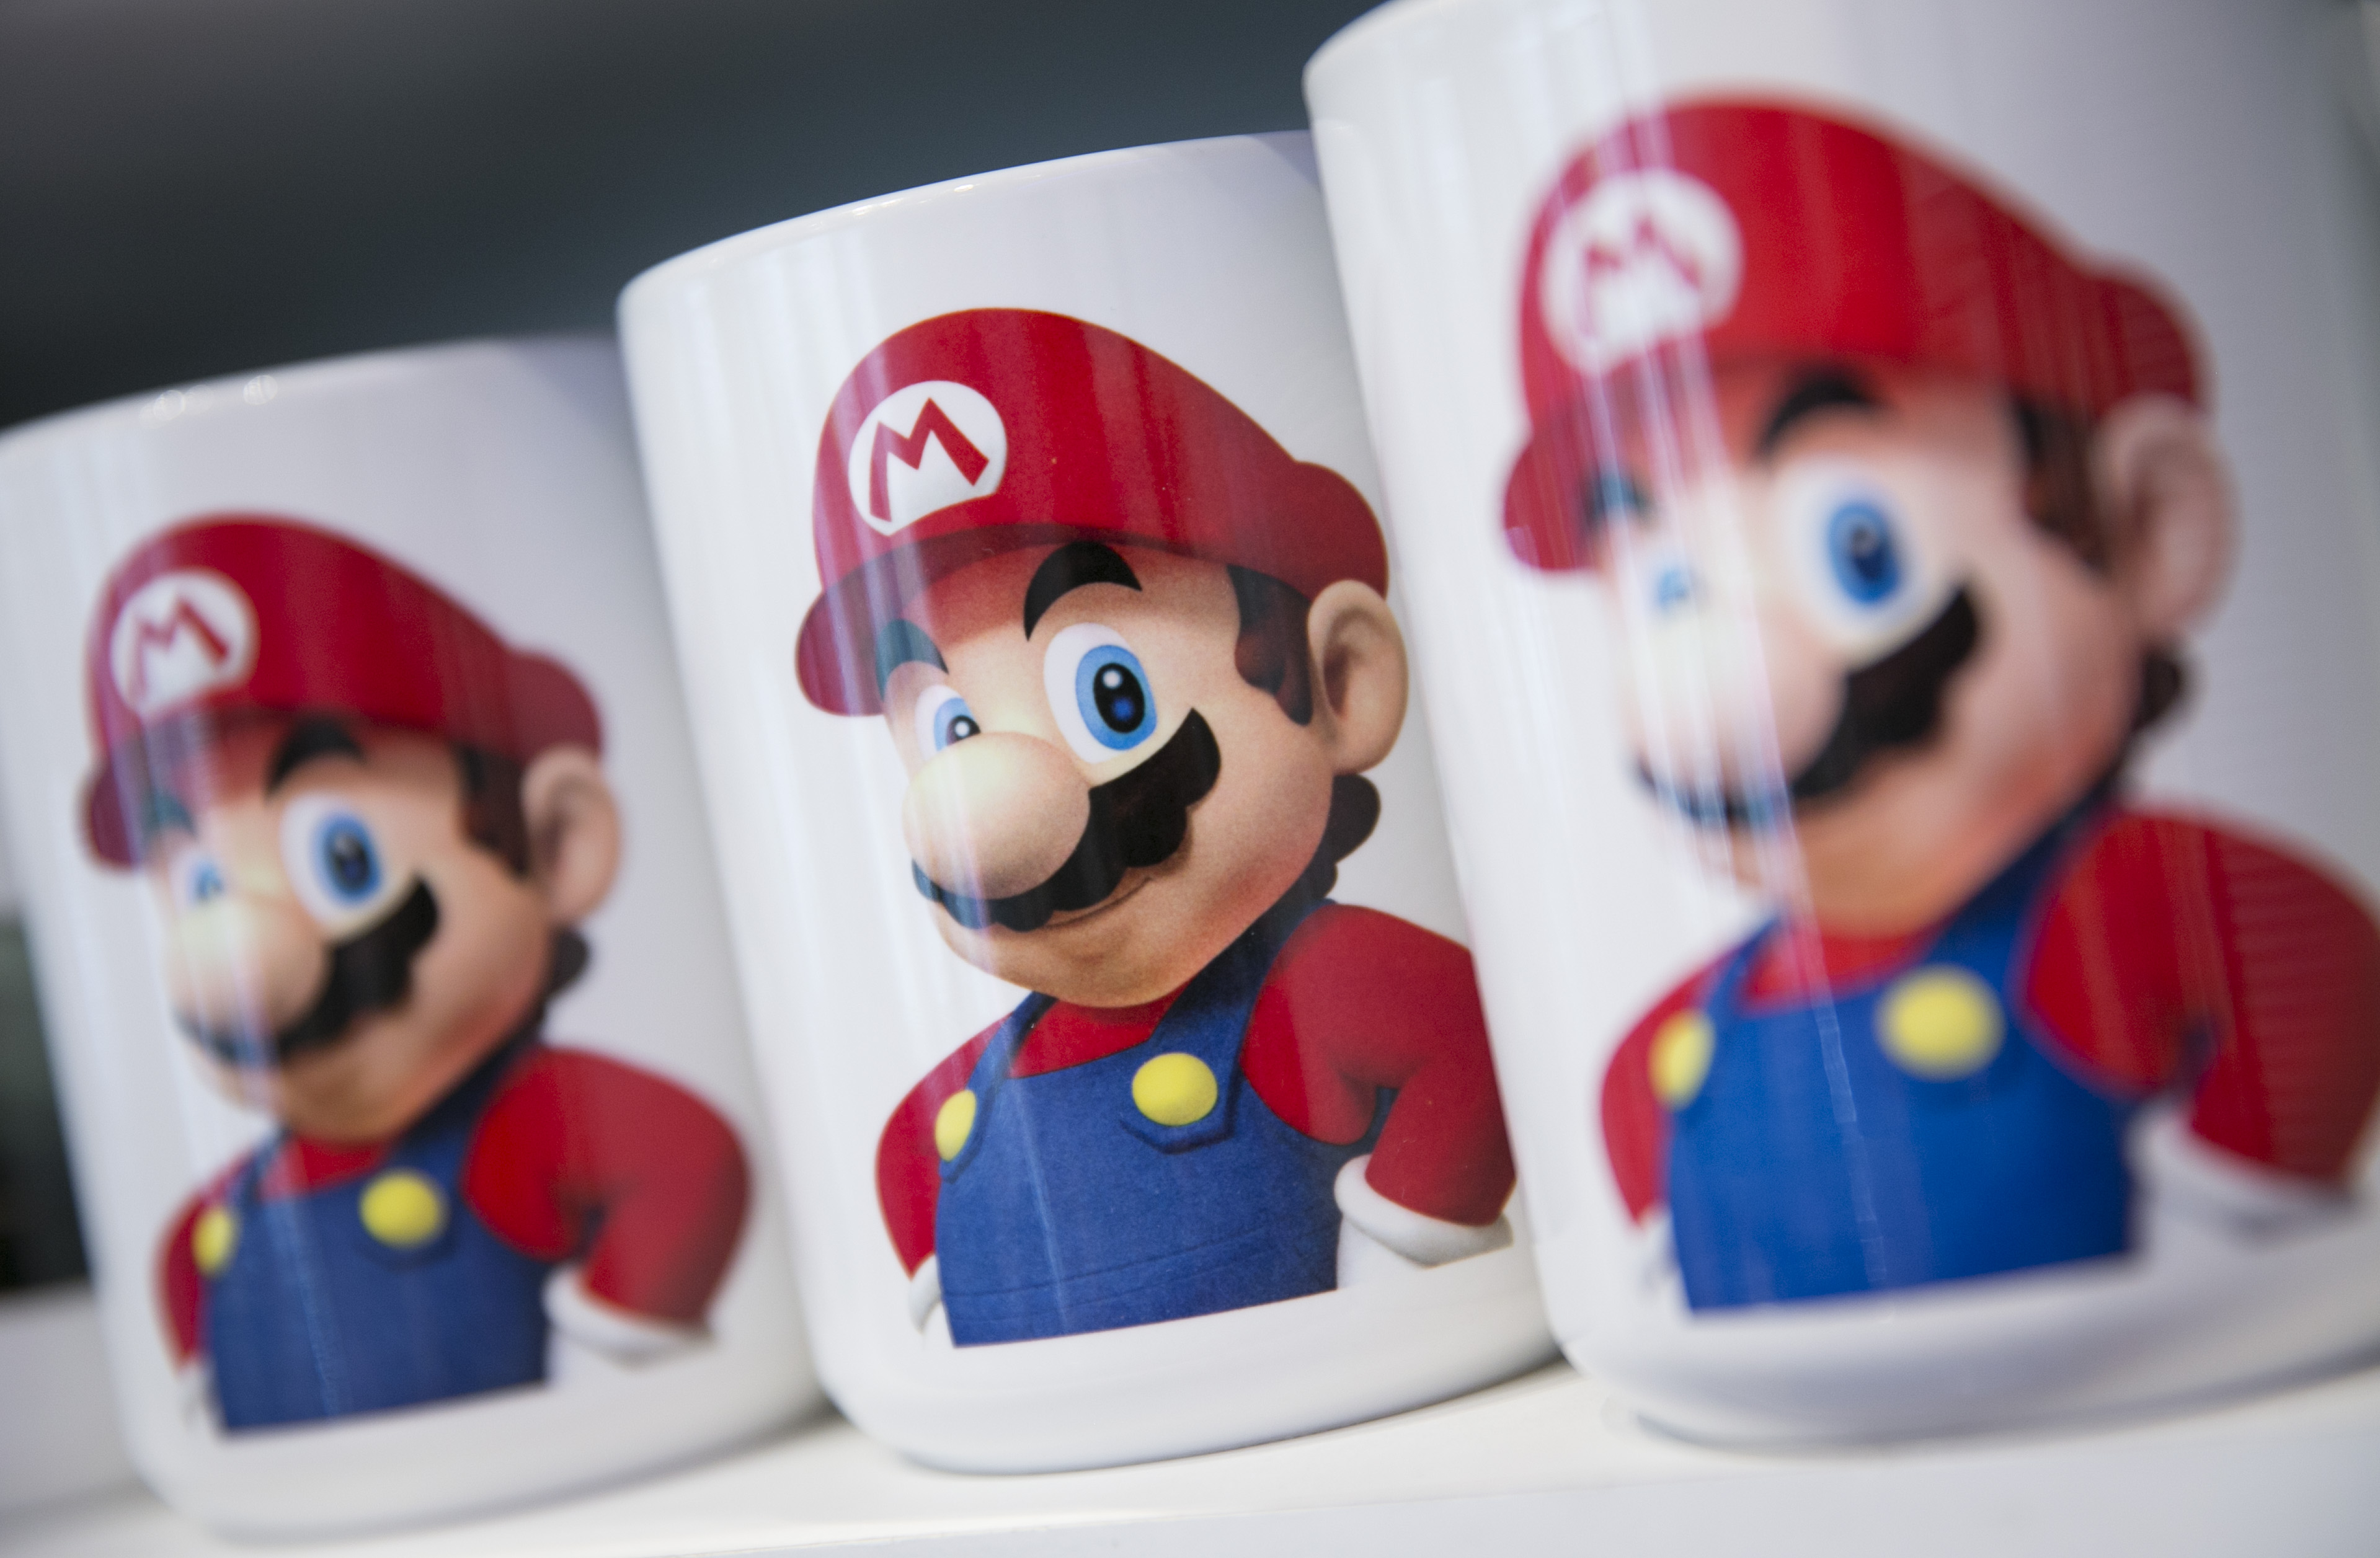 Nintendo Co.'s Super Mario is displayed on coffee mugs for sale at the Nintendo World store in New York, U.S., on Friday, May 17, 2013. (Bloomberg&mdash;Bloomberg via Getty Images)